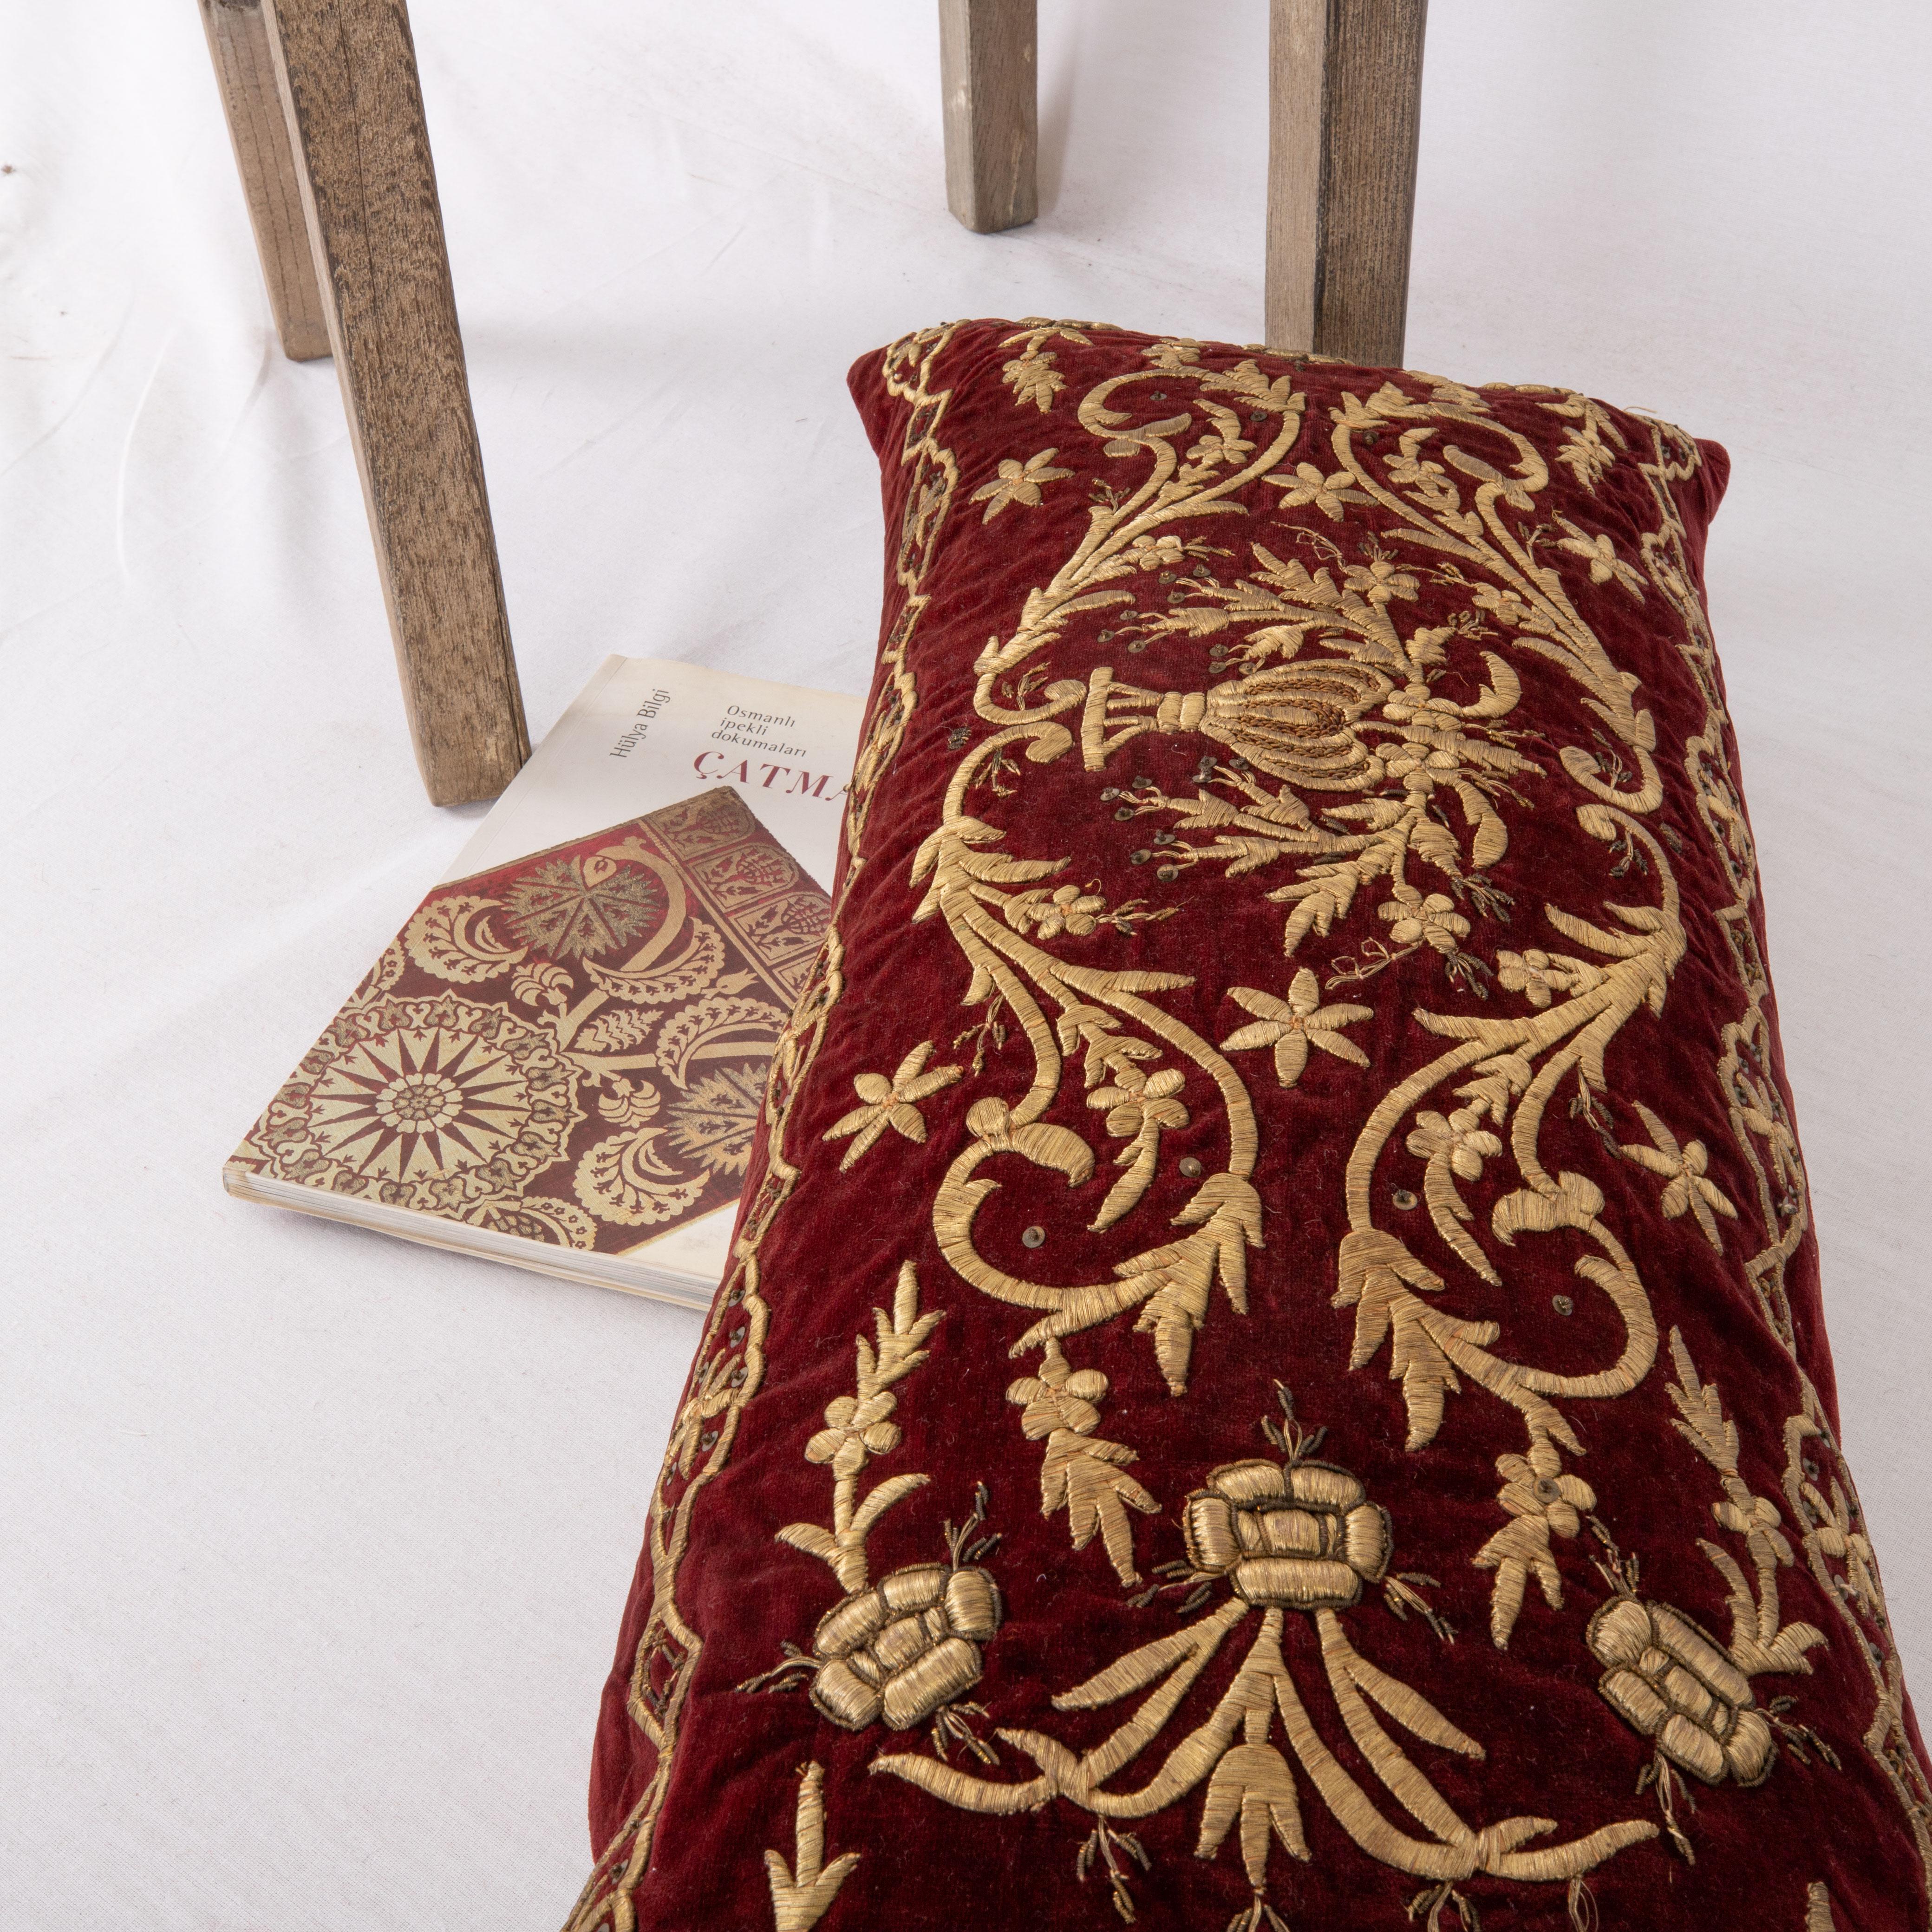 Antique Silk Velvet Ottoman Sarma Pillow Cover, Late 19th Century In Good Condition For Sale In Istanbul, TR